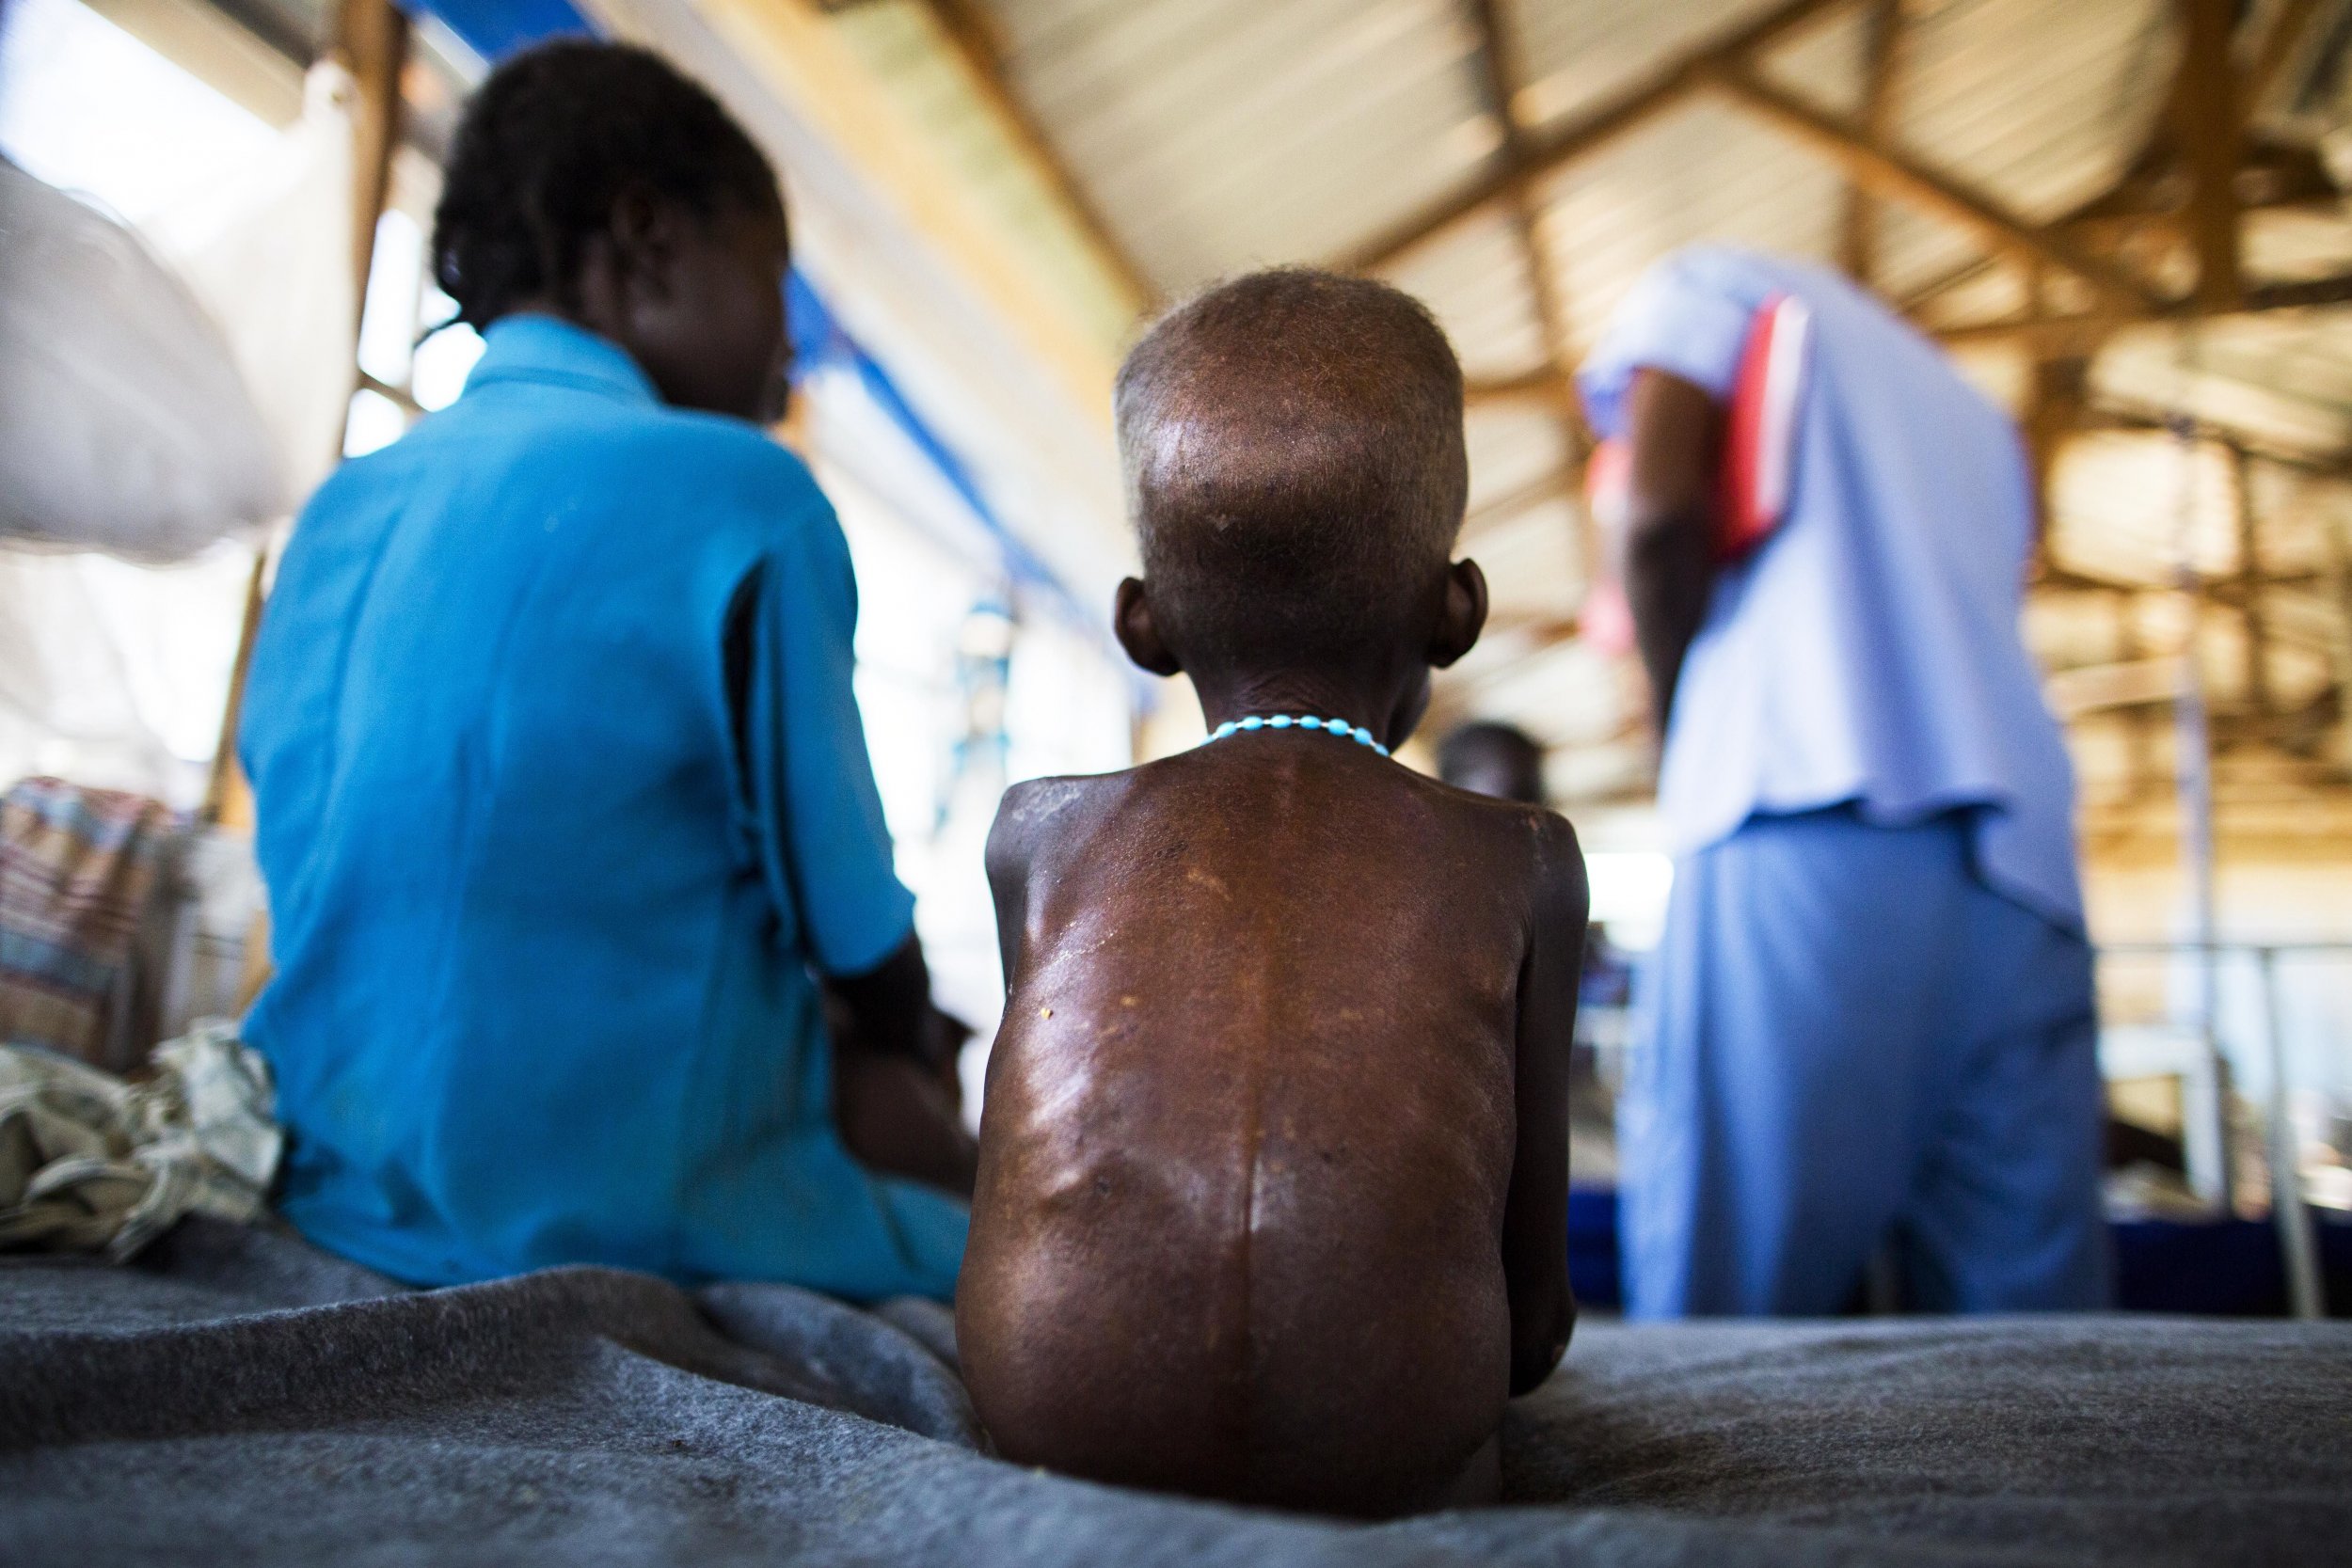 A South Sudanese boy with severe malnutrition rests in hospital.